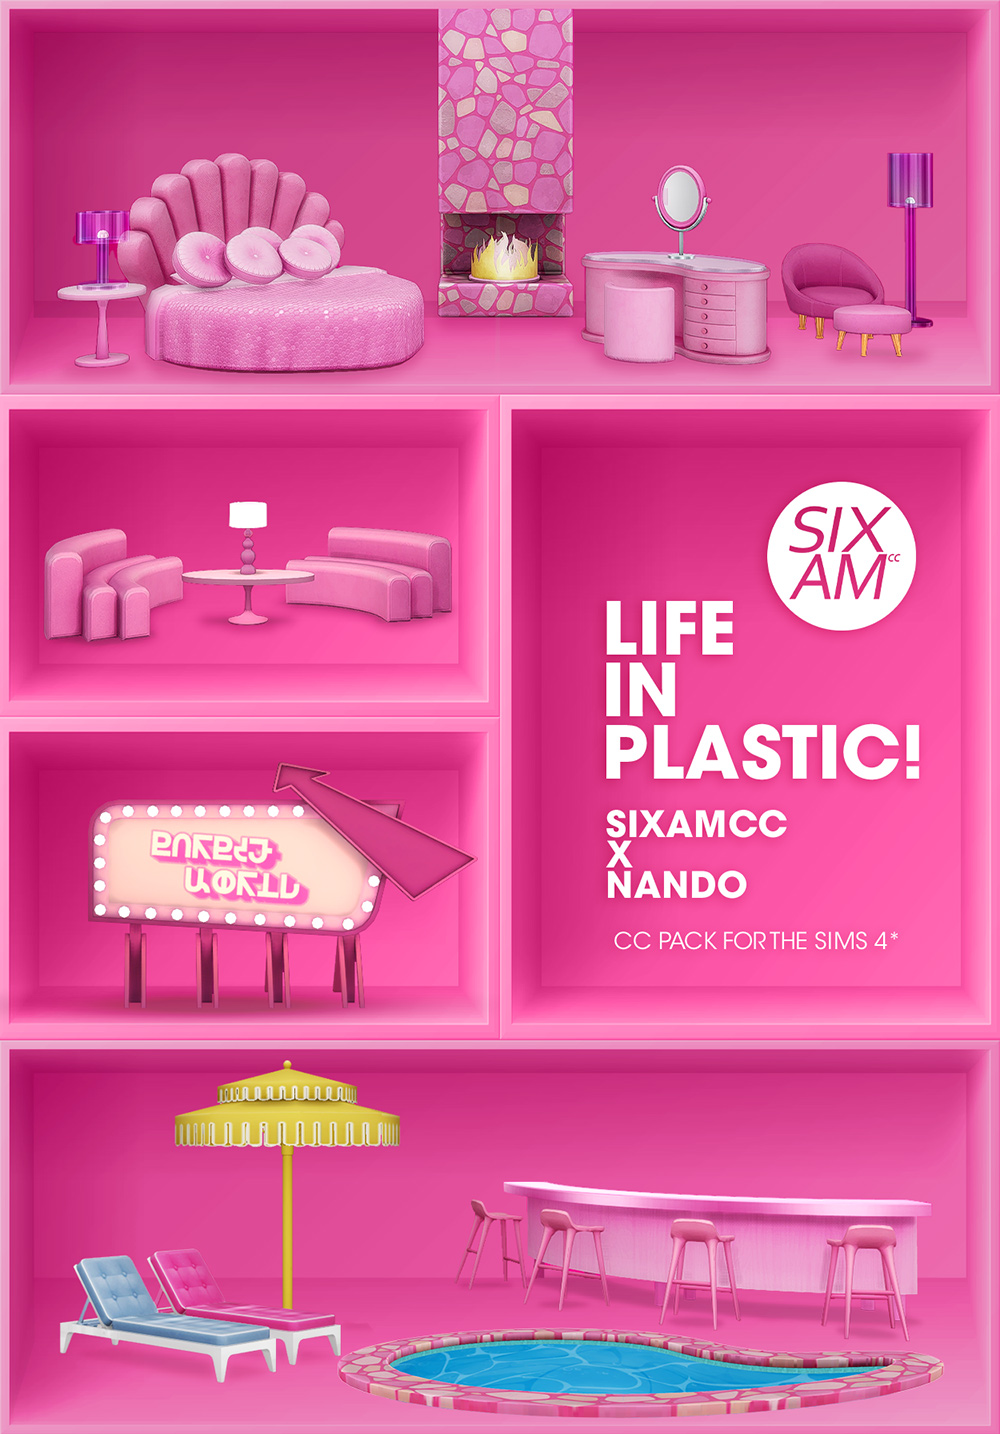 Life in Plastic! 💗 A Barbie World (CC Pack for The Sims 4)